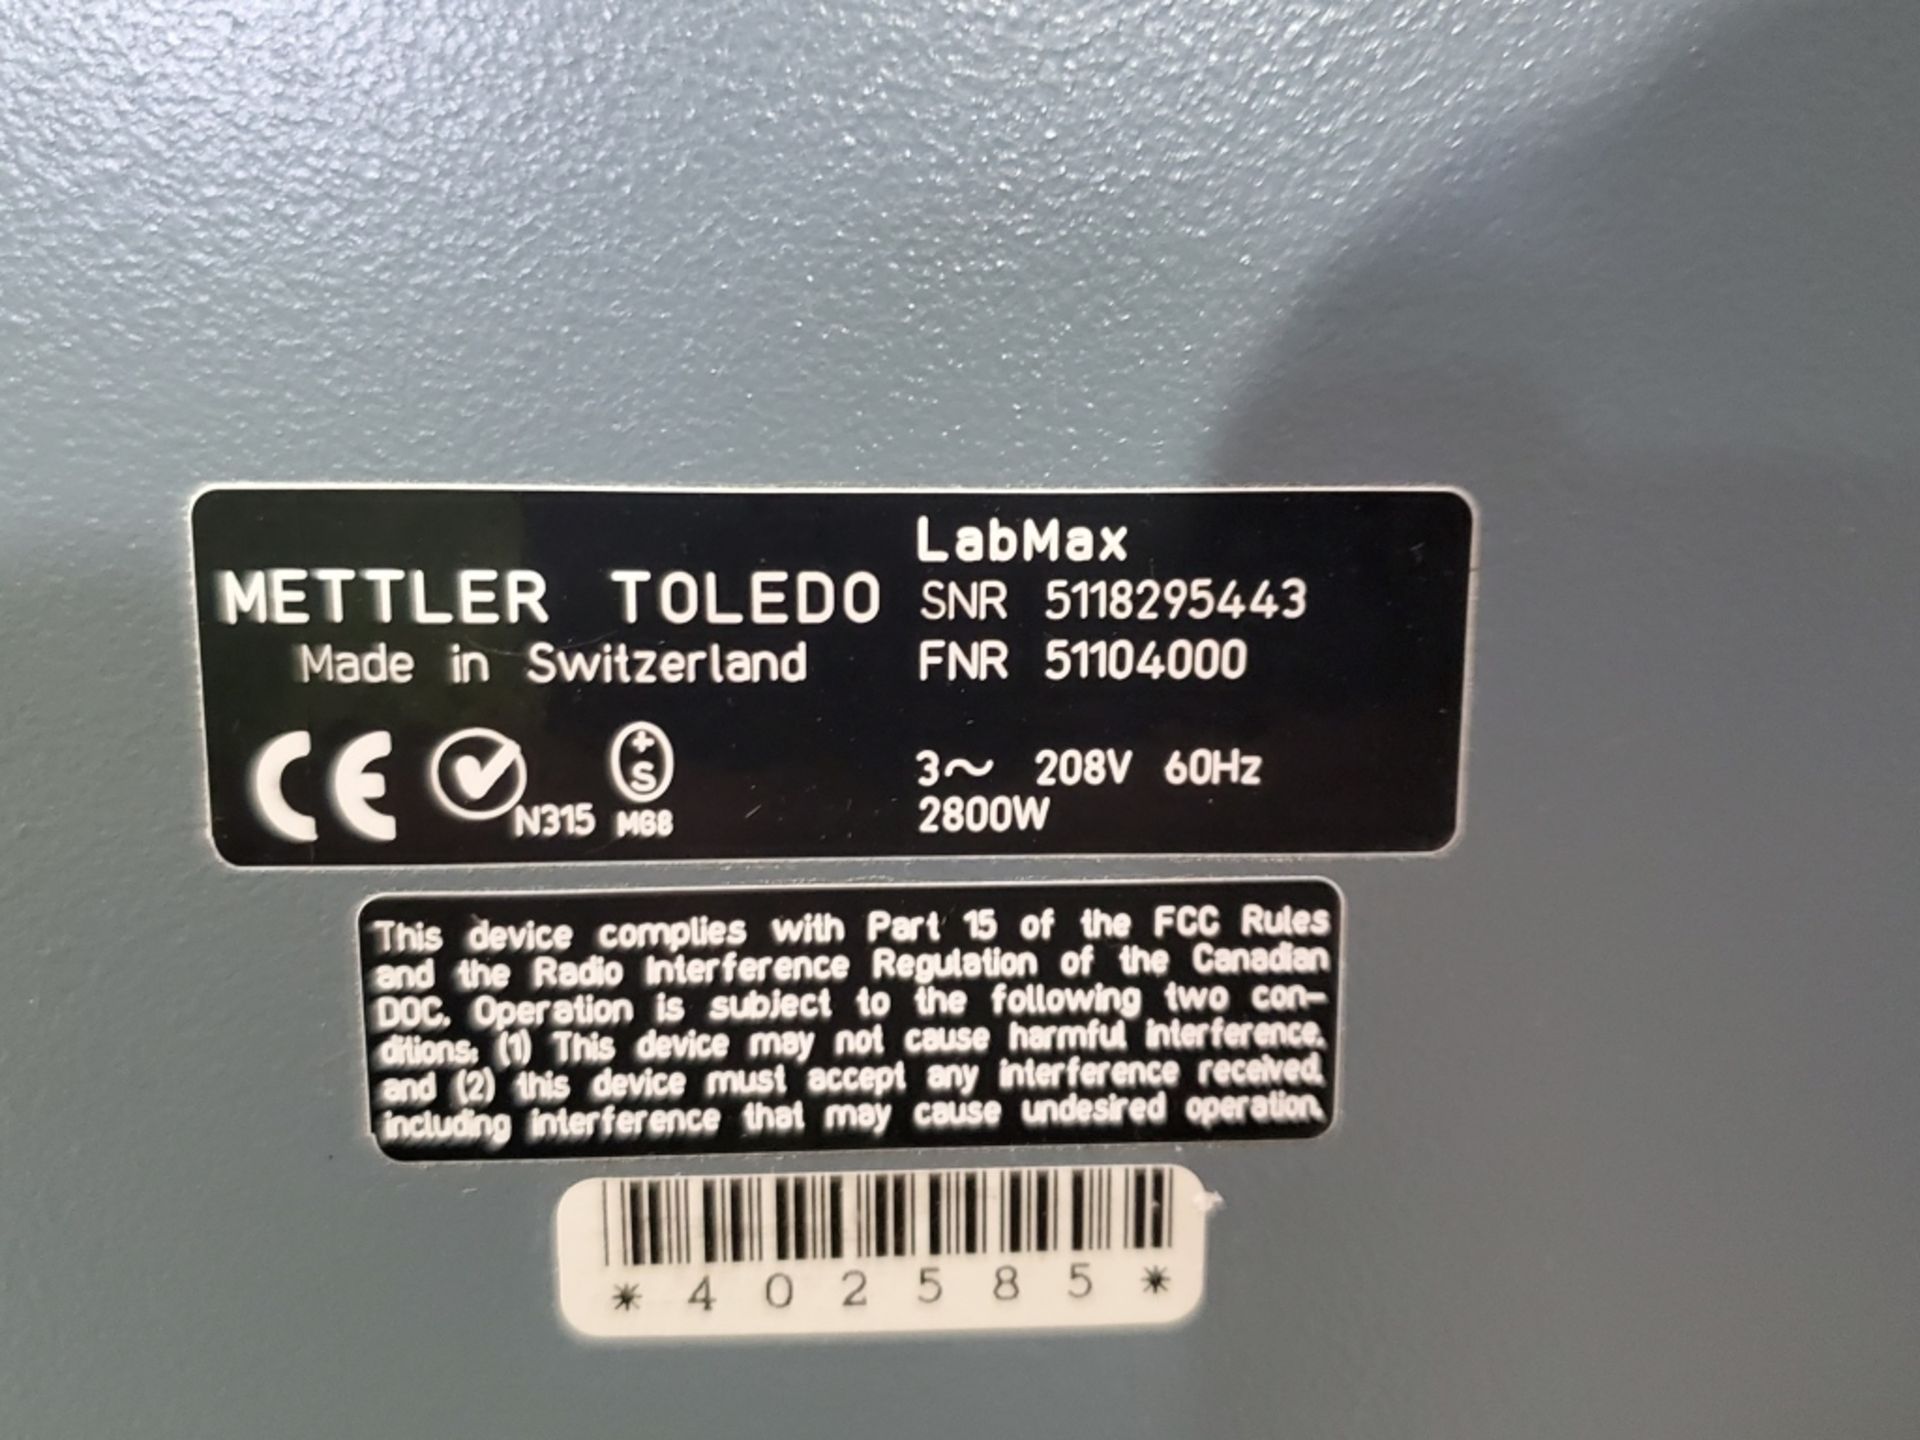 Mettler Toledo LabMax Automatic Lab Reactor - Image 5 of 5